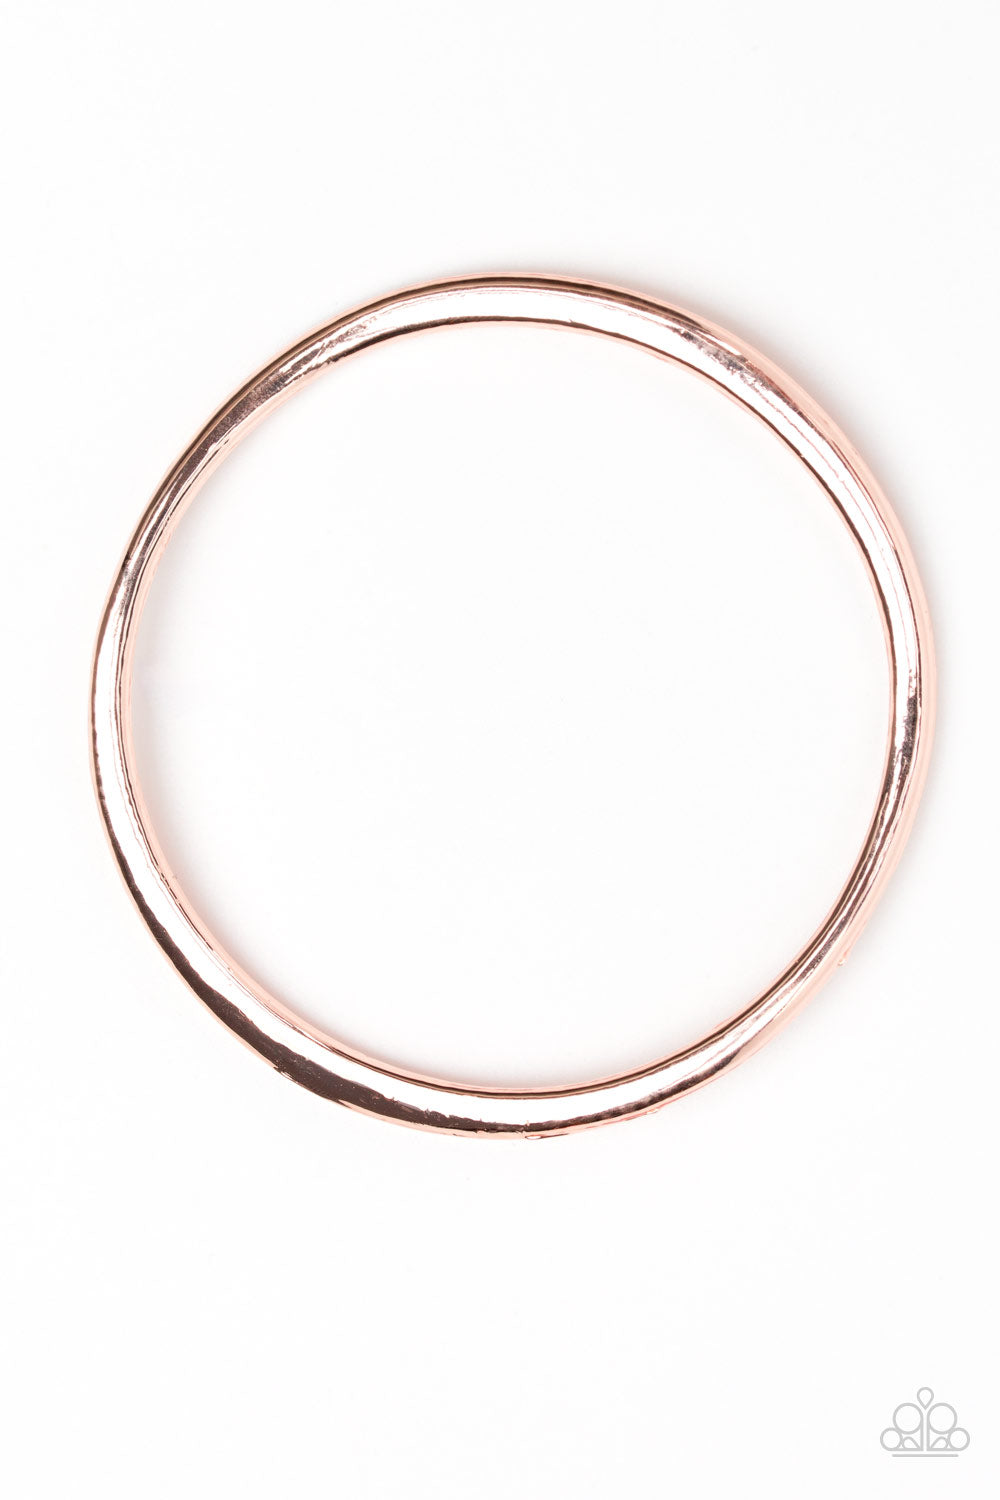 five-dollar-jewelry-awesomely-asymmetrical-rose-gold-paparazzi-accessories